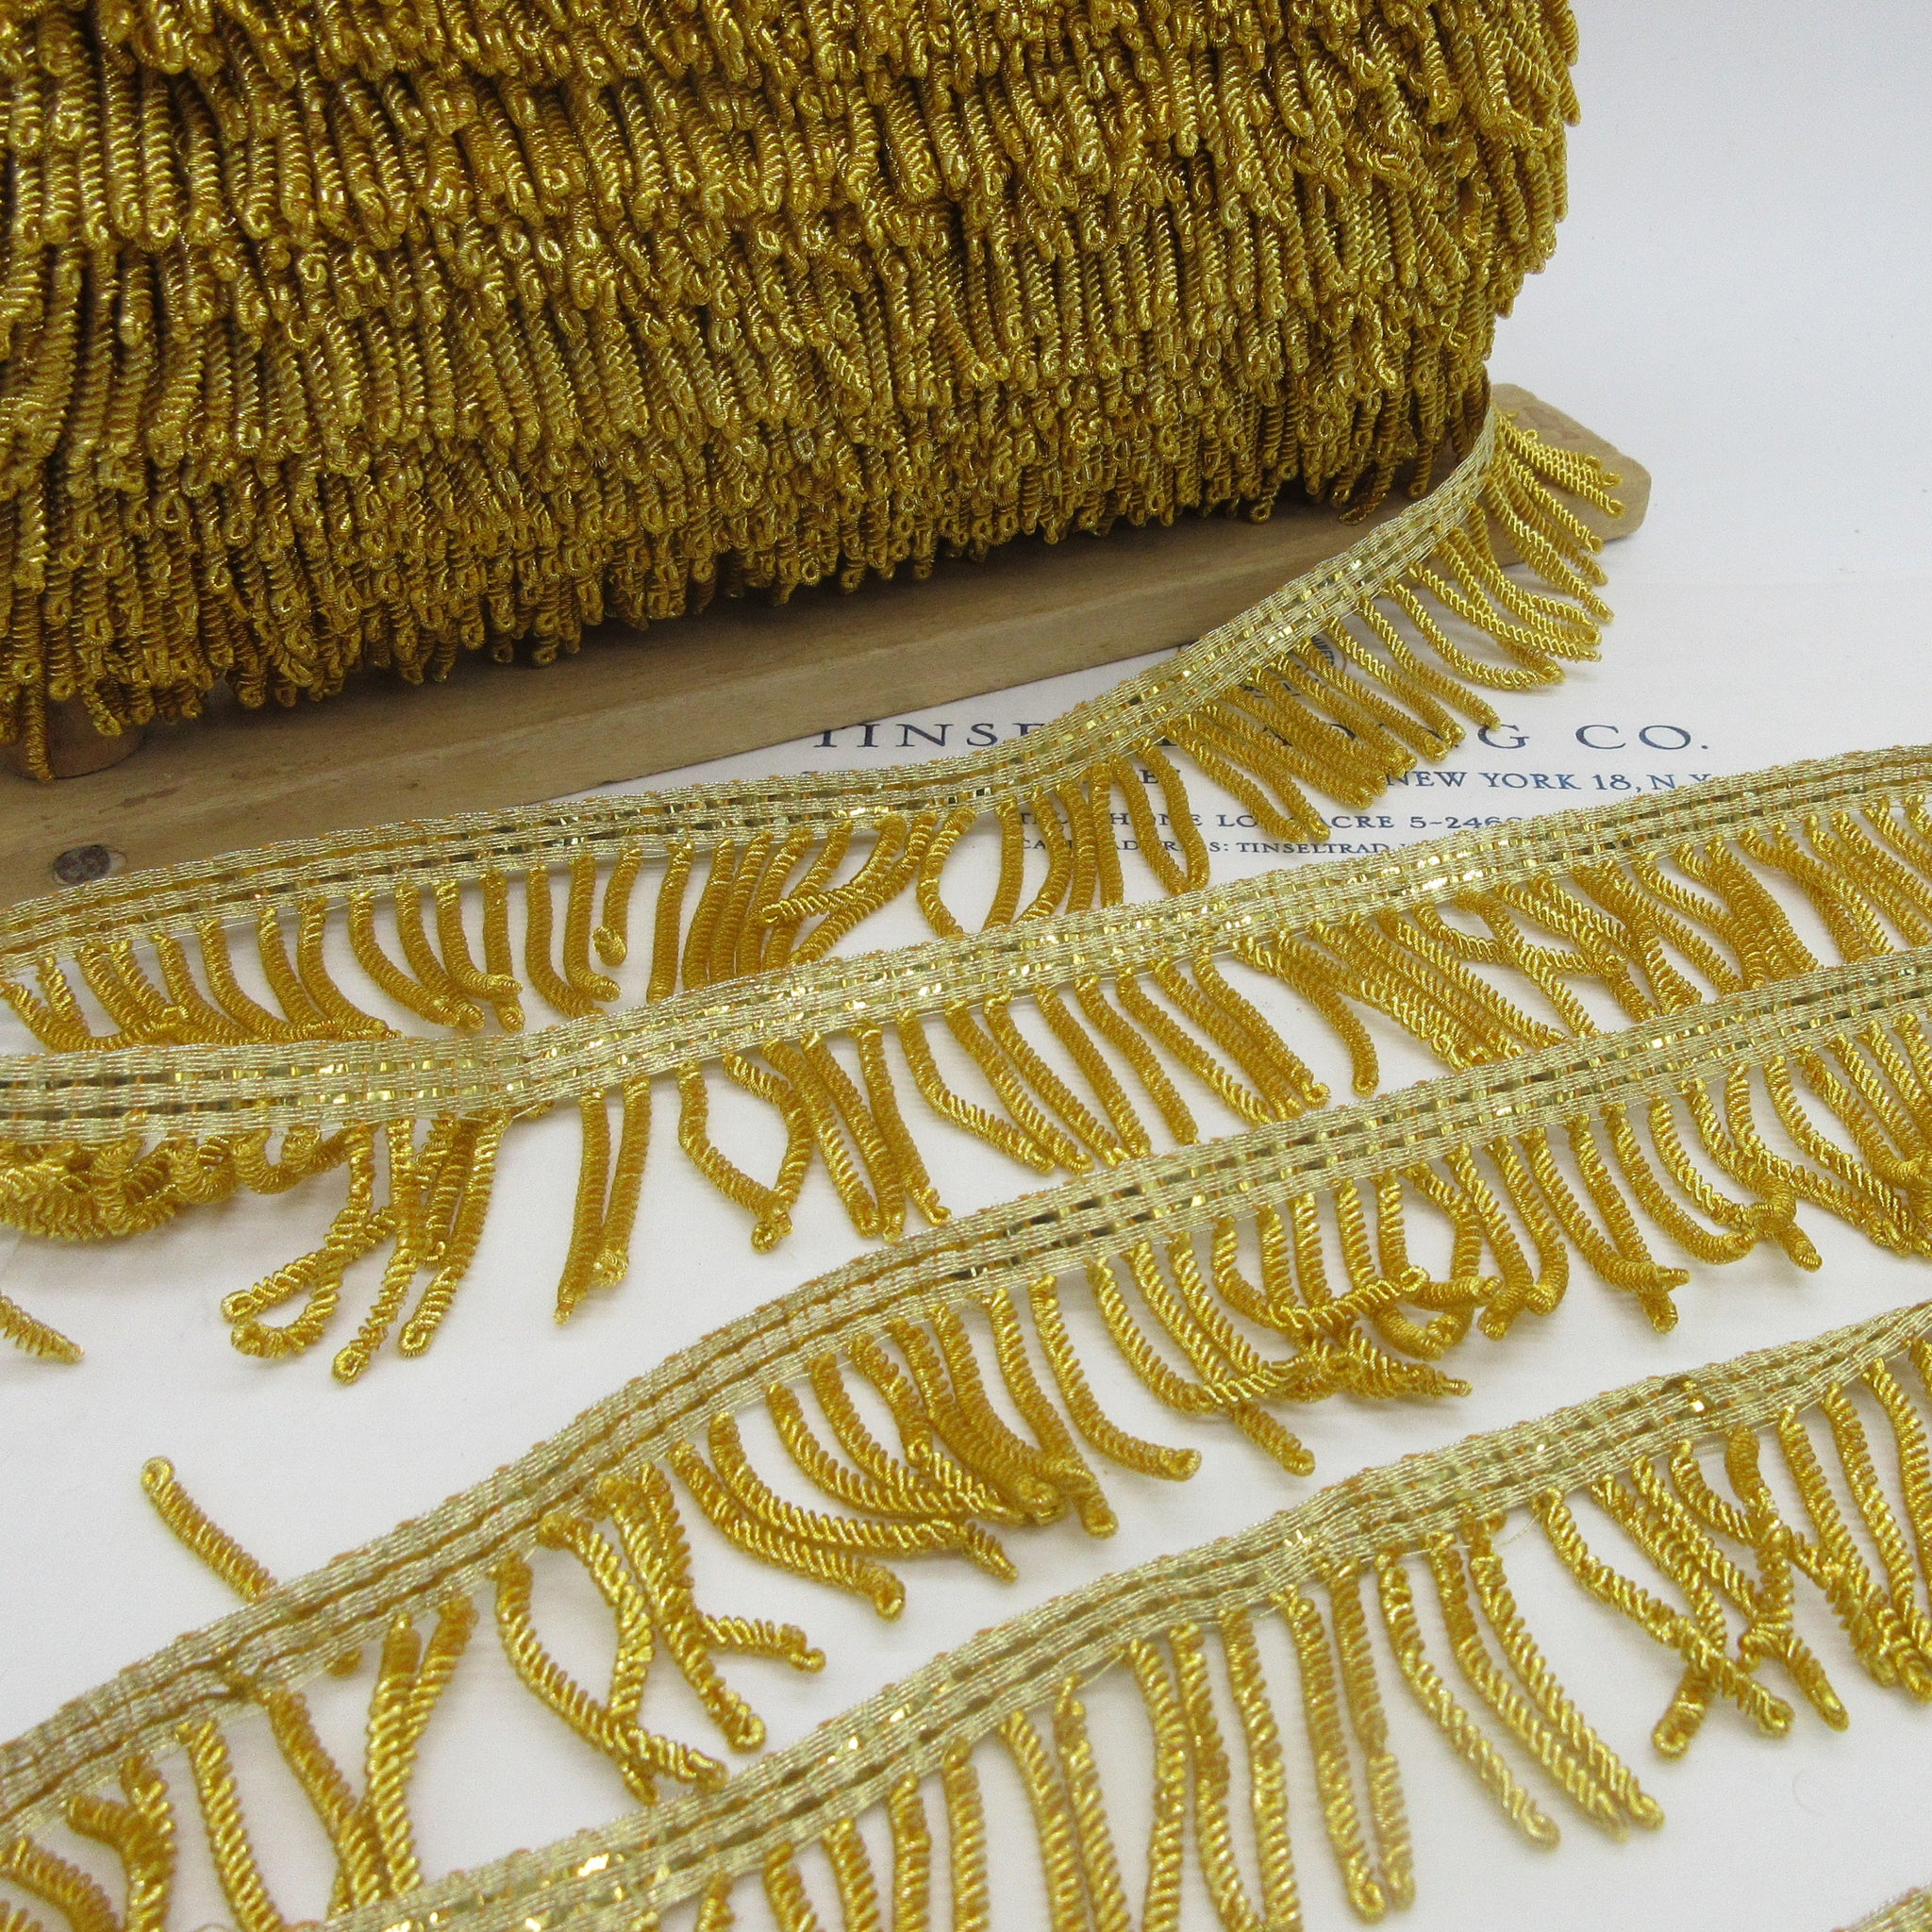 DÉCOPRO 3 inch Bullion Fringe Trim/Style#EF300 (24108), Color: Camel Gold - E16c / Sold by The Yard